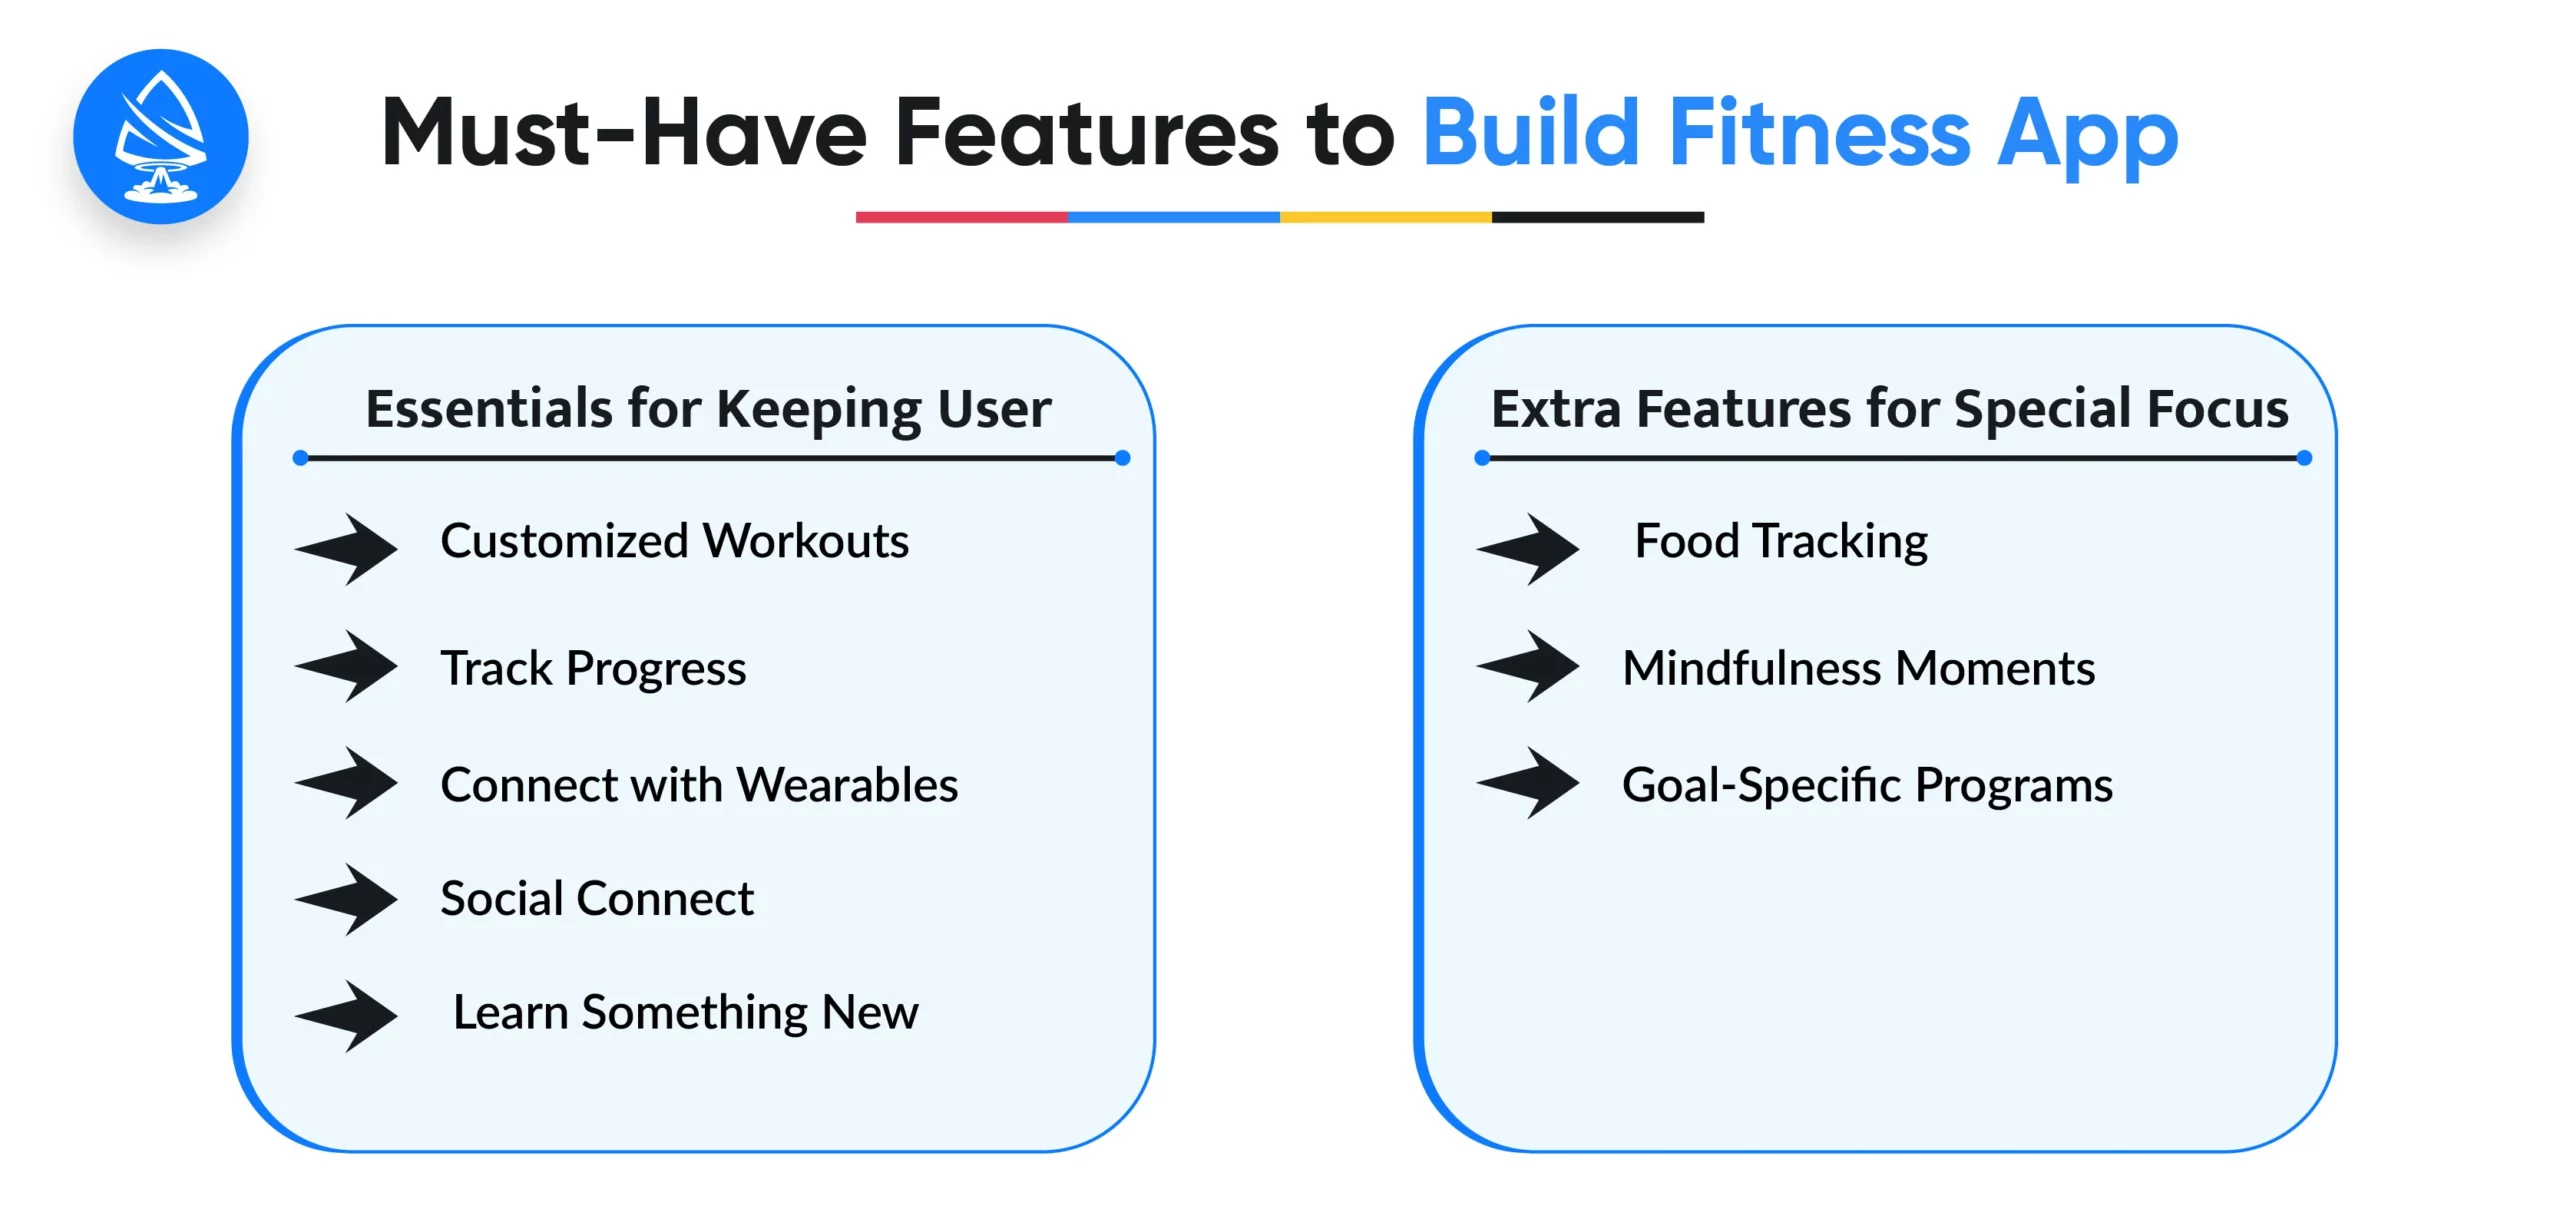 Must-Have Features to Build a Fitness App